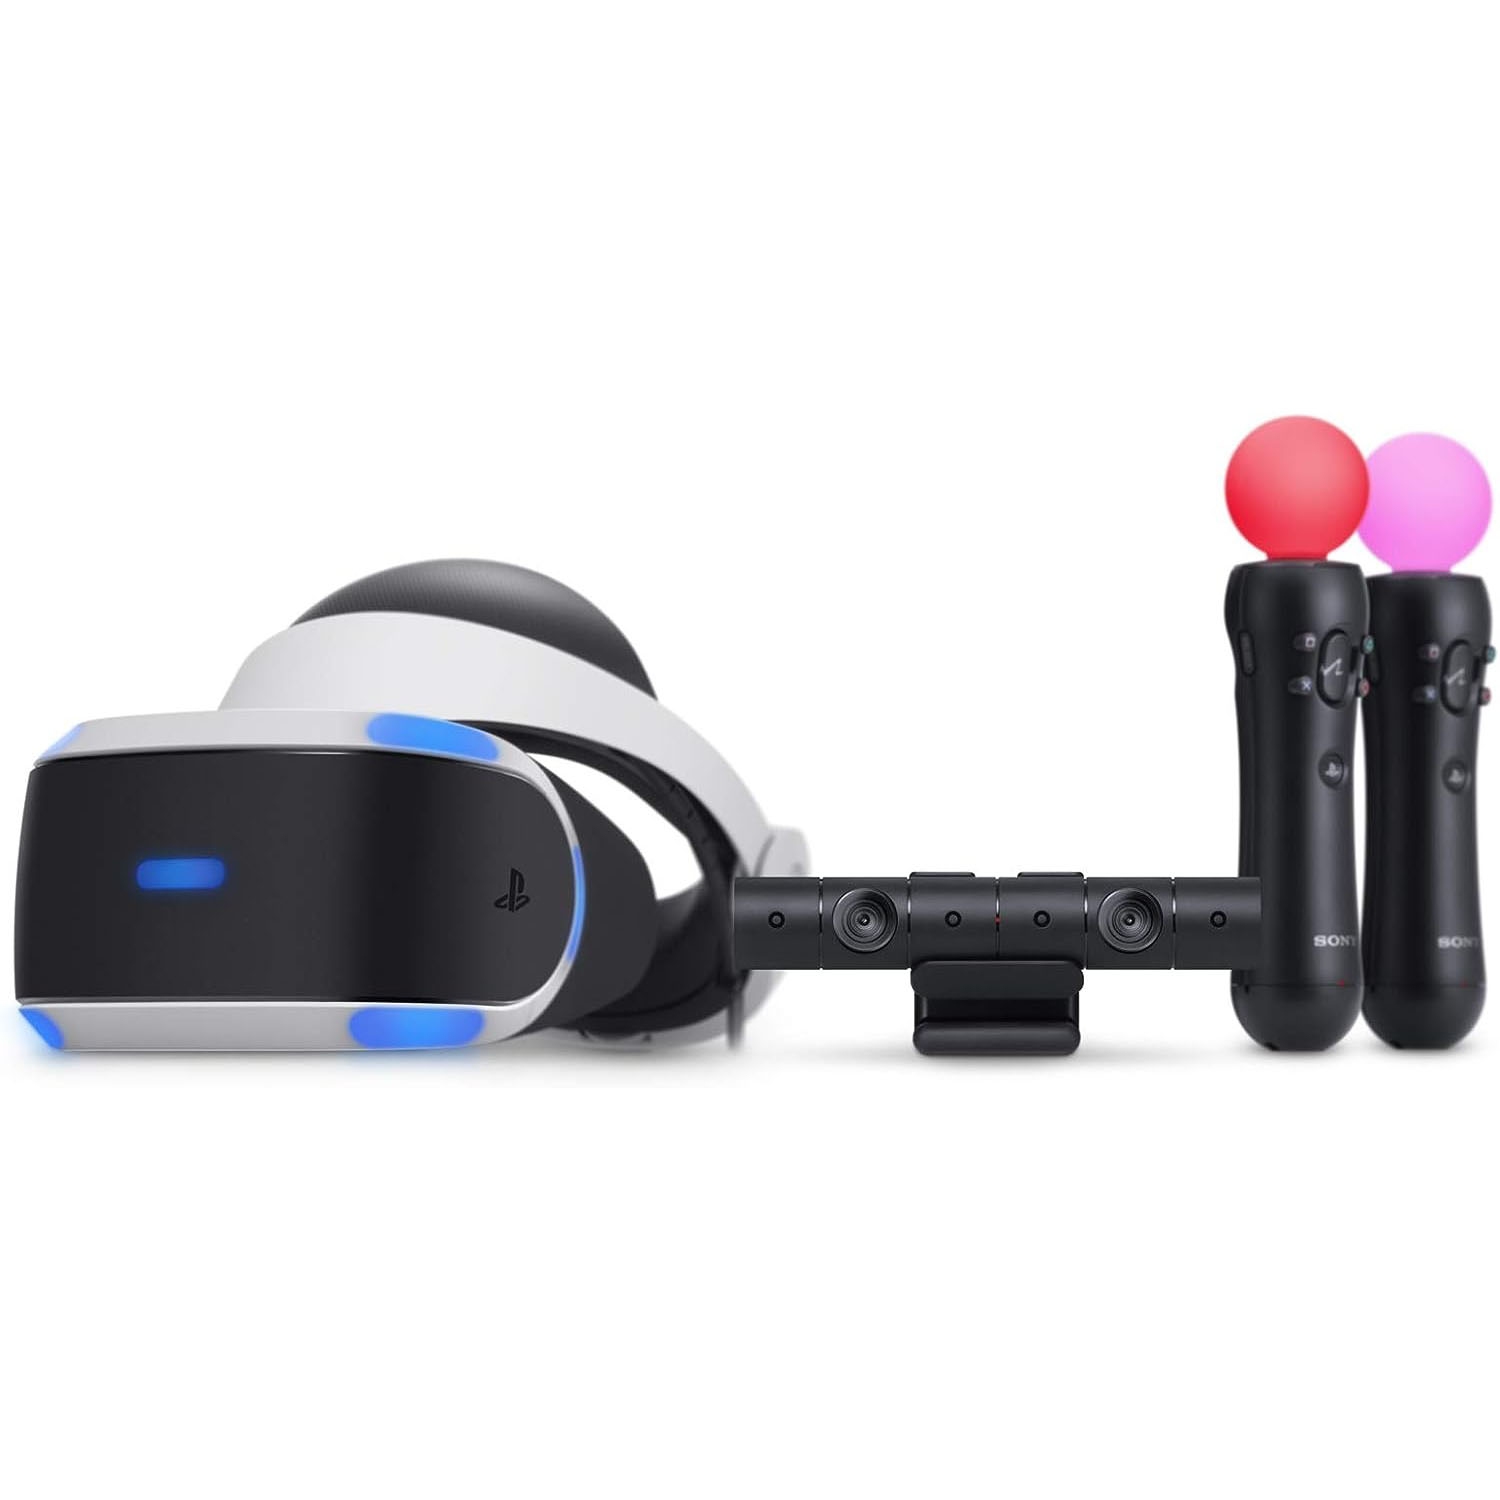 Sony Playstation VR Headset, Camera and Dual Move Controllers Bundle for Playstation 4